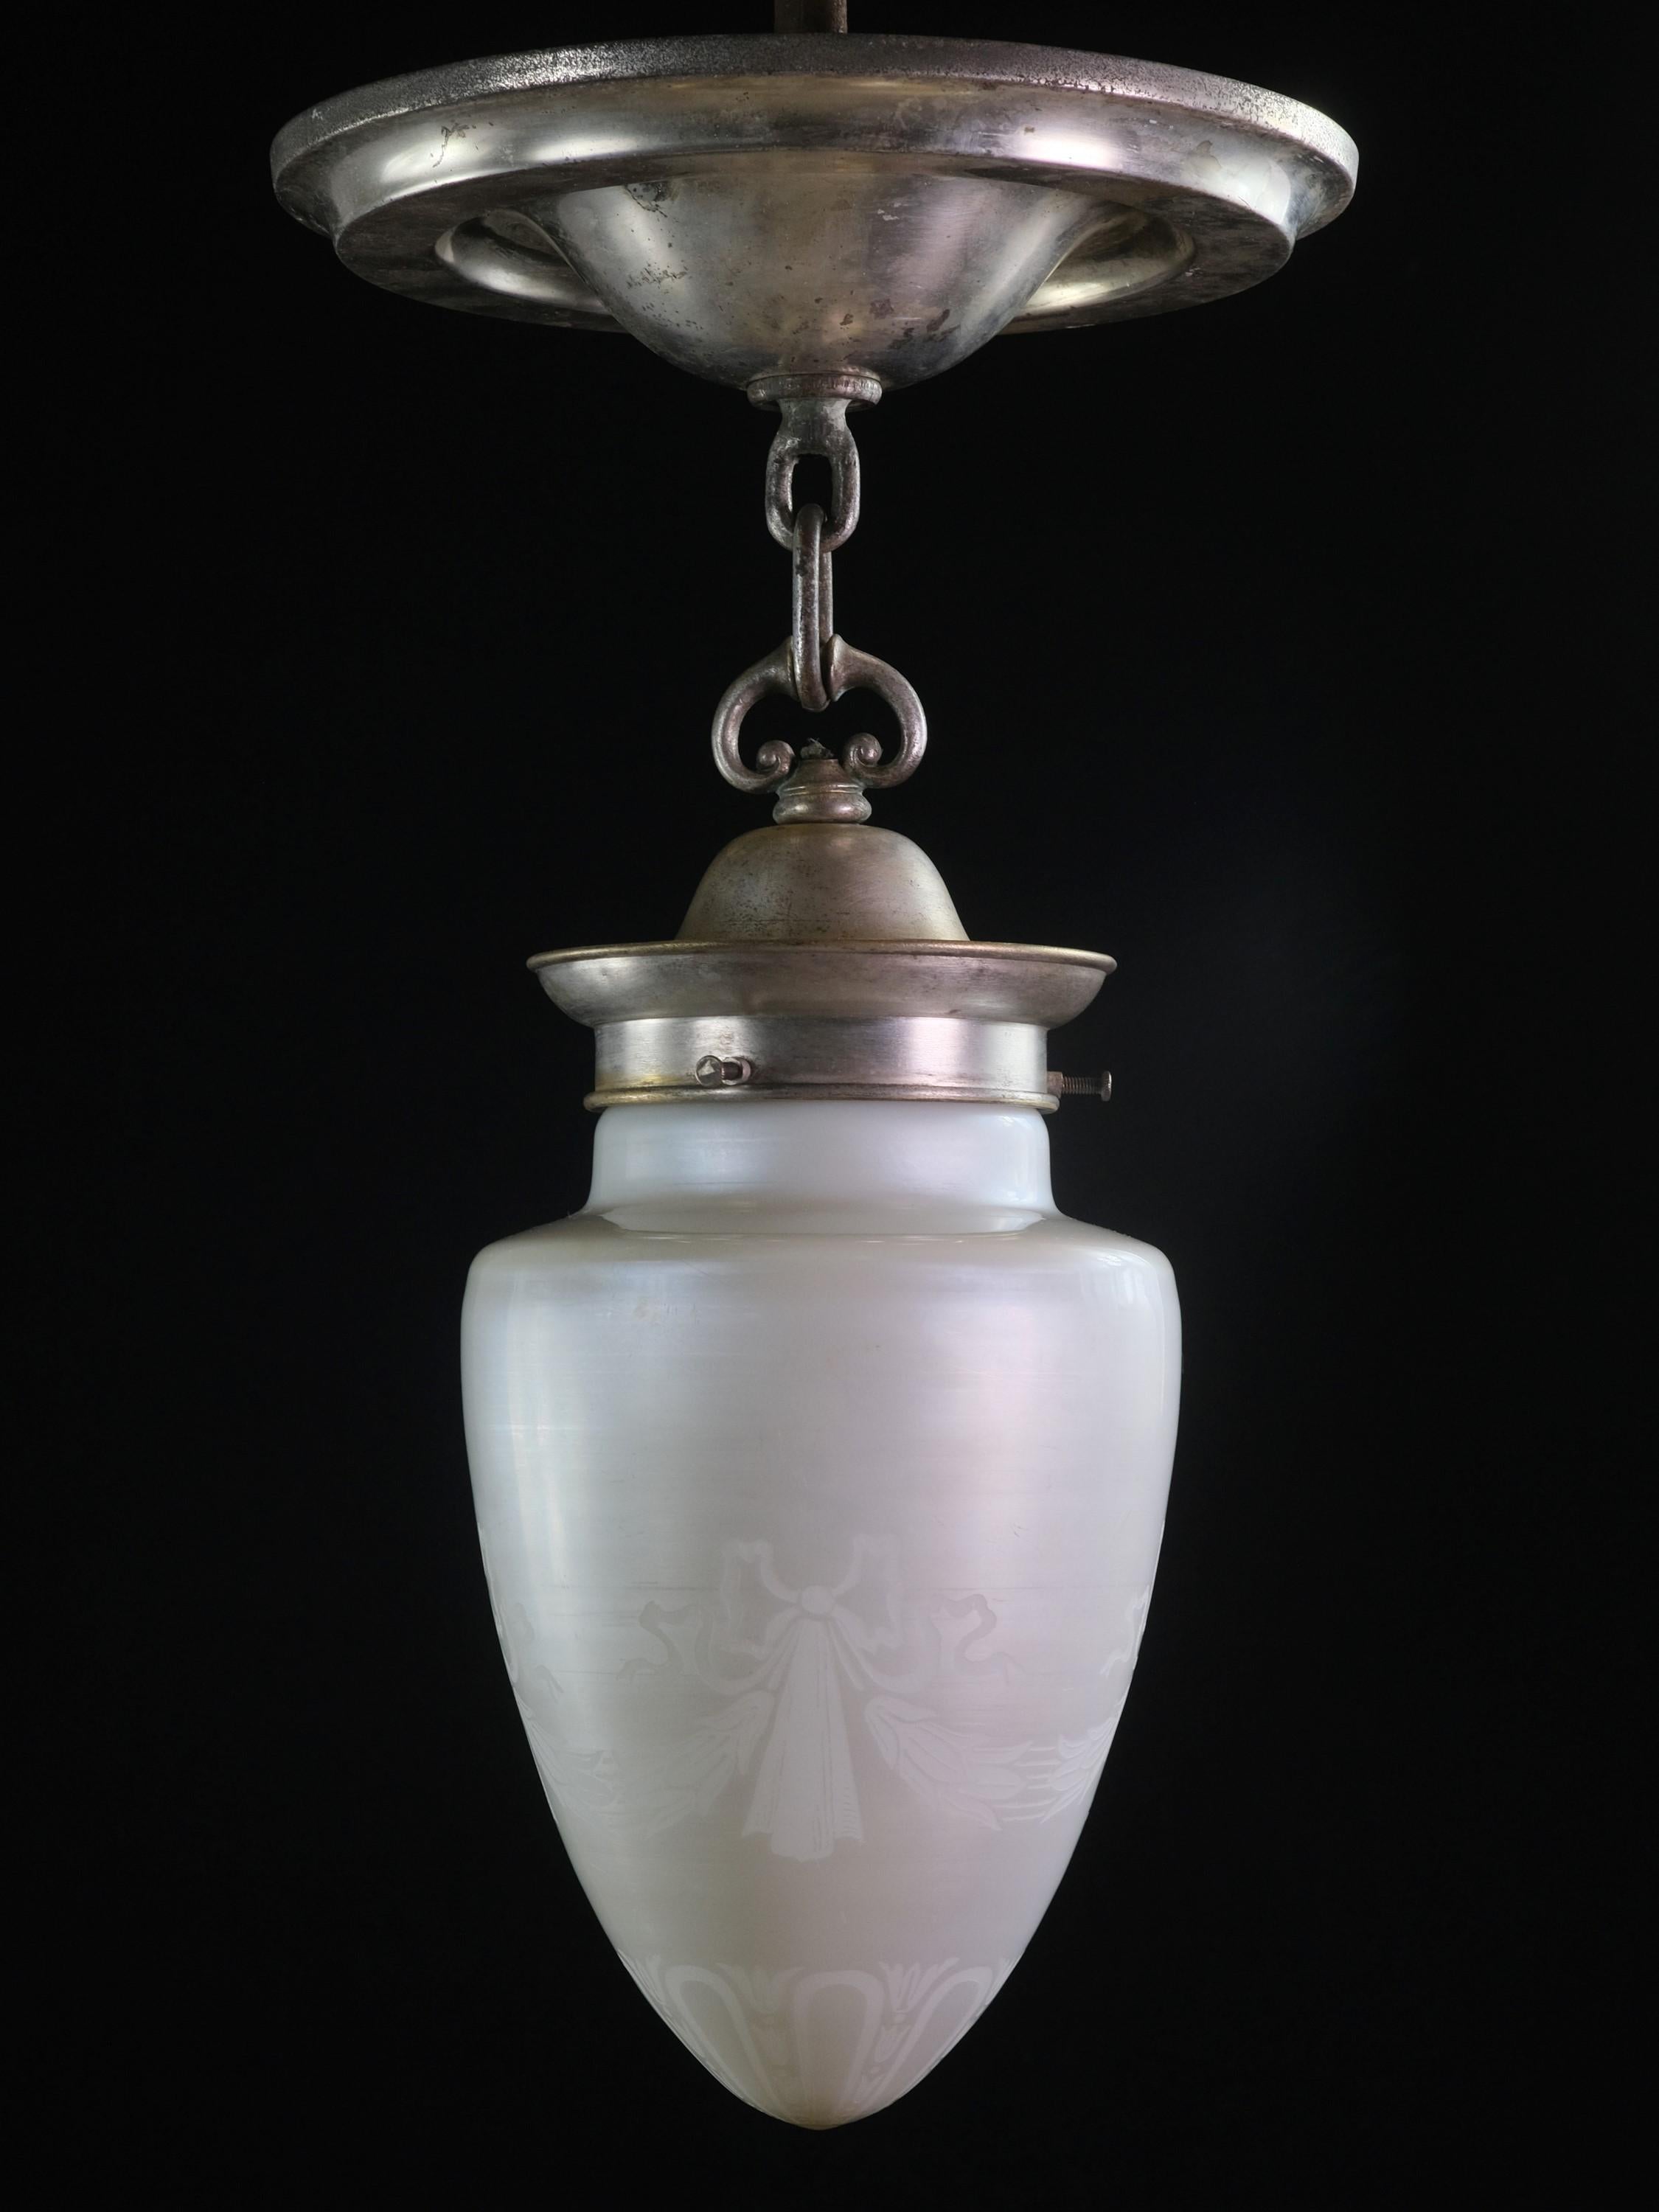 Antique Steuben iridescent cone shaped light with silver plated brass fitter.  The glass globe has etched ribbon and foliate details.   Price includes restoration. This can be seen at our 400 Gilligan St location in Scranton, PA.